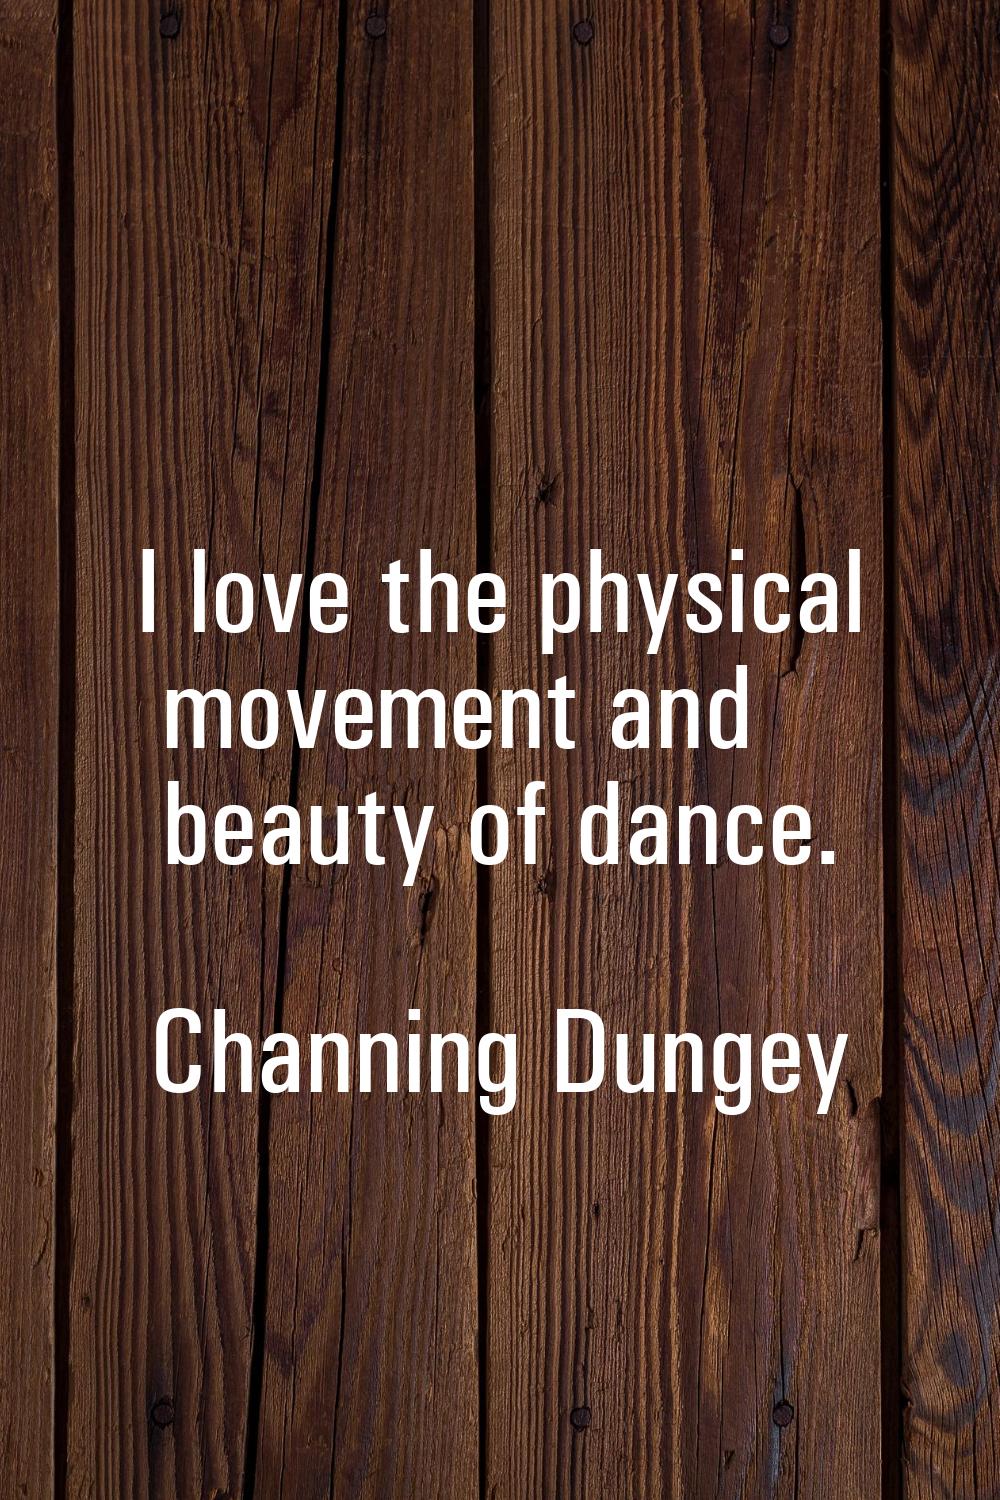 I love the physical movement and beauty of dance.